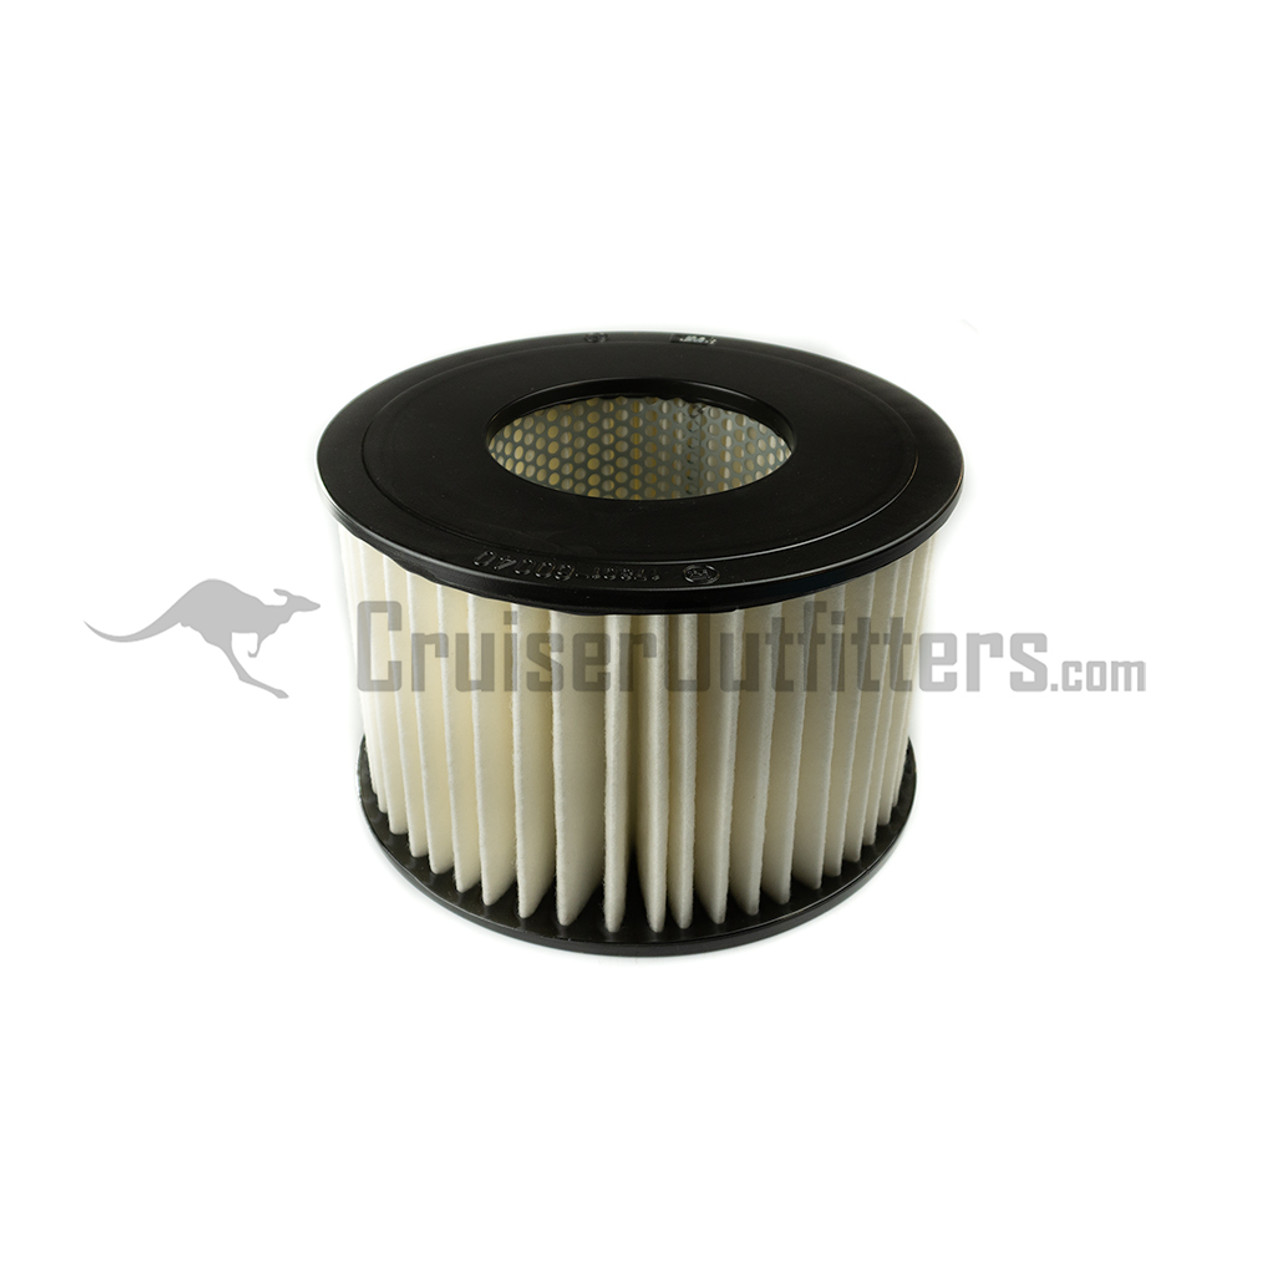 ENGAF60040 - Air Filter - Fits 3/1969-12/1974 F Engine